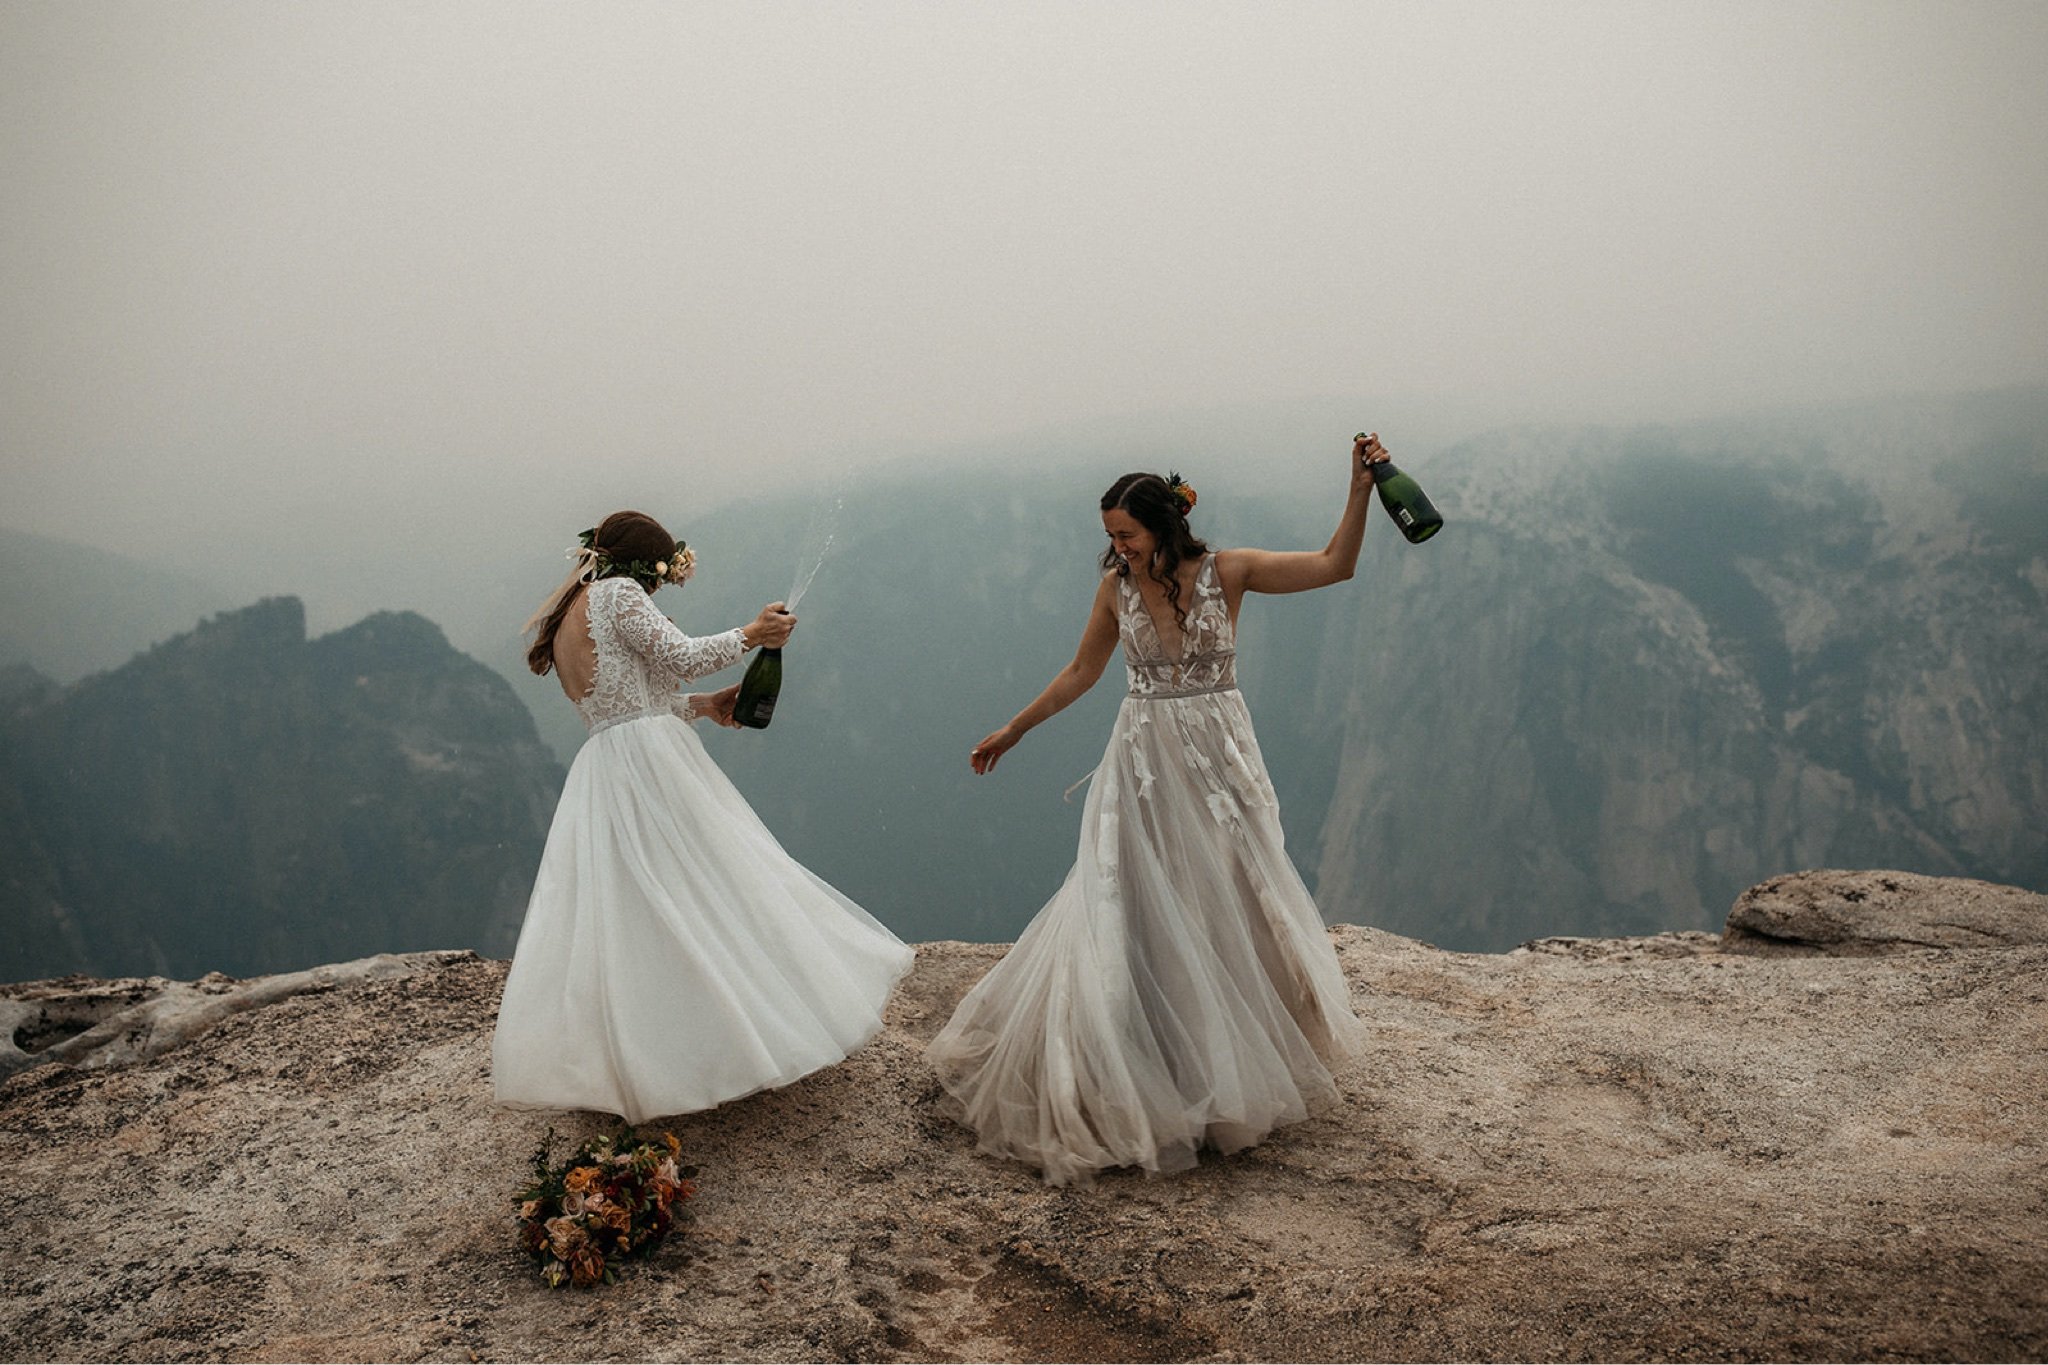 Yosemite National Park Elopement with Two Brides-Will Khoury44.jpg